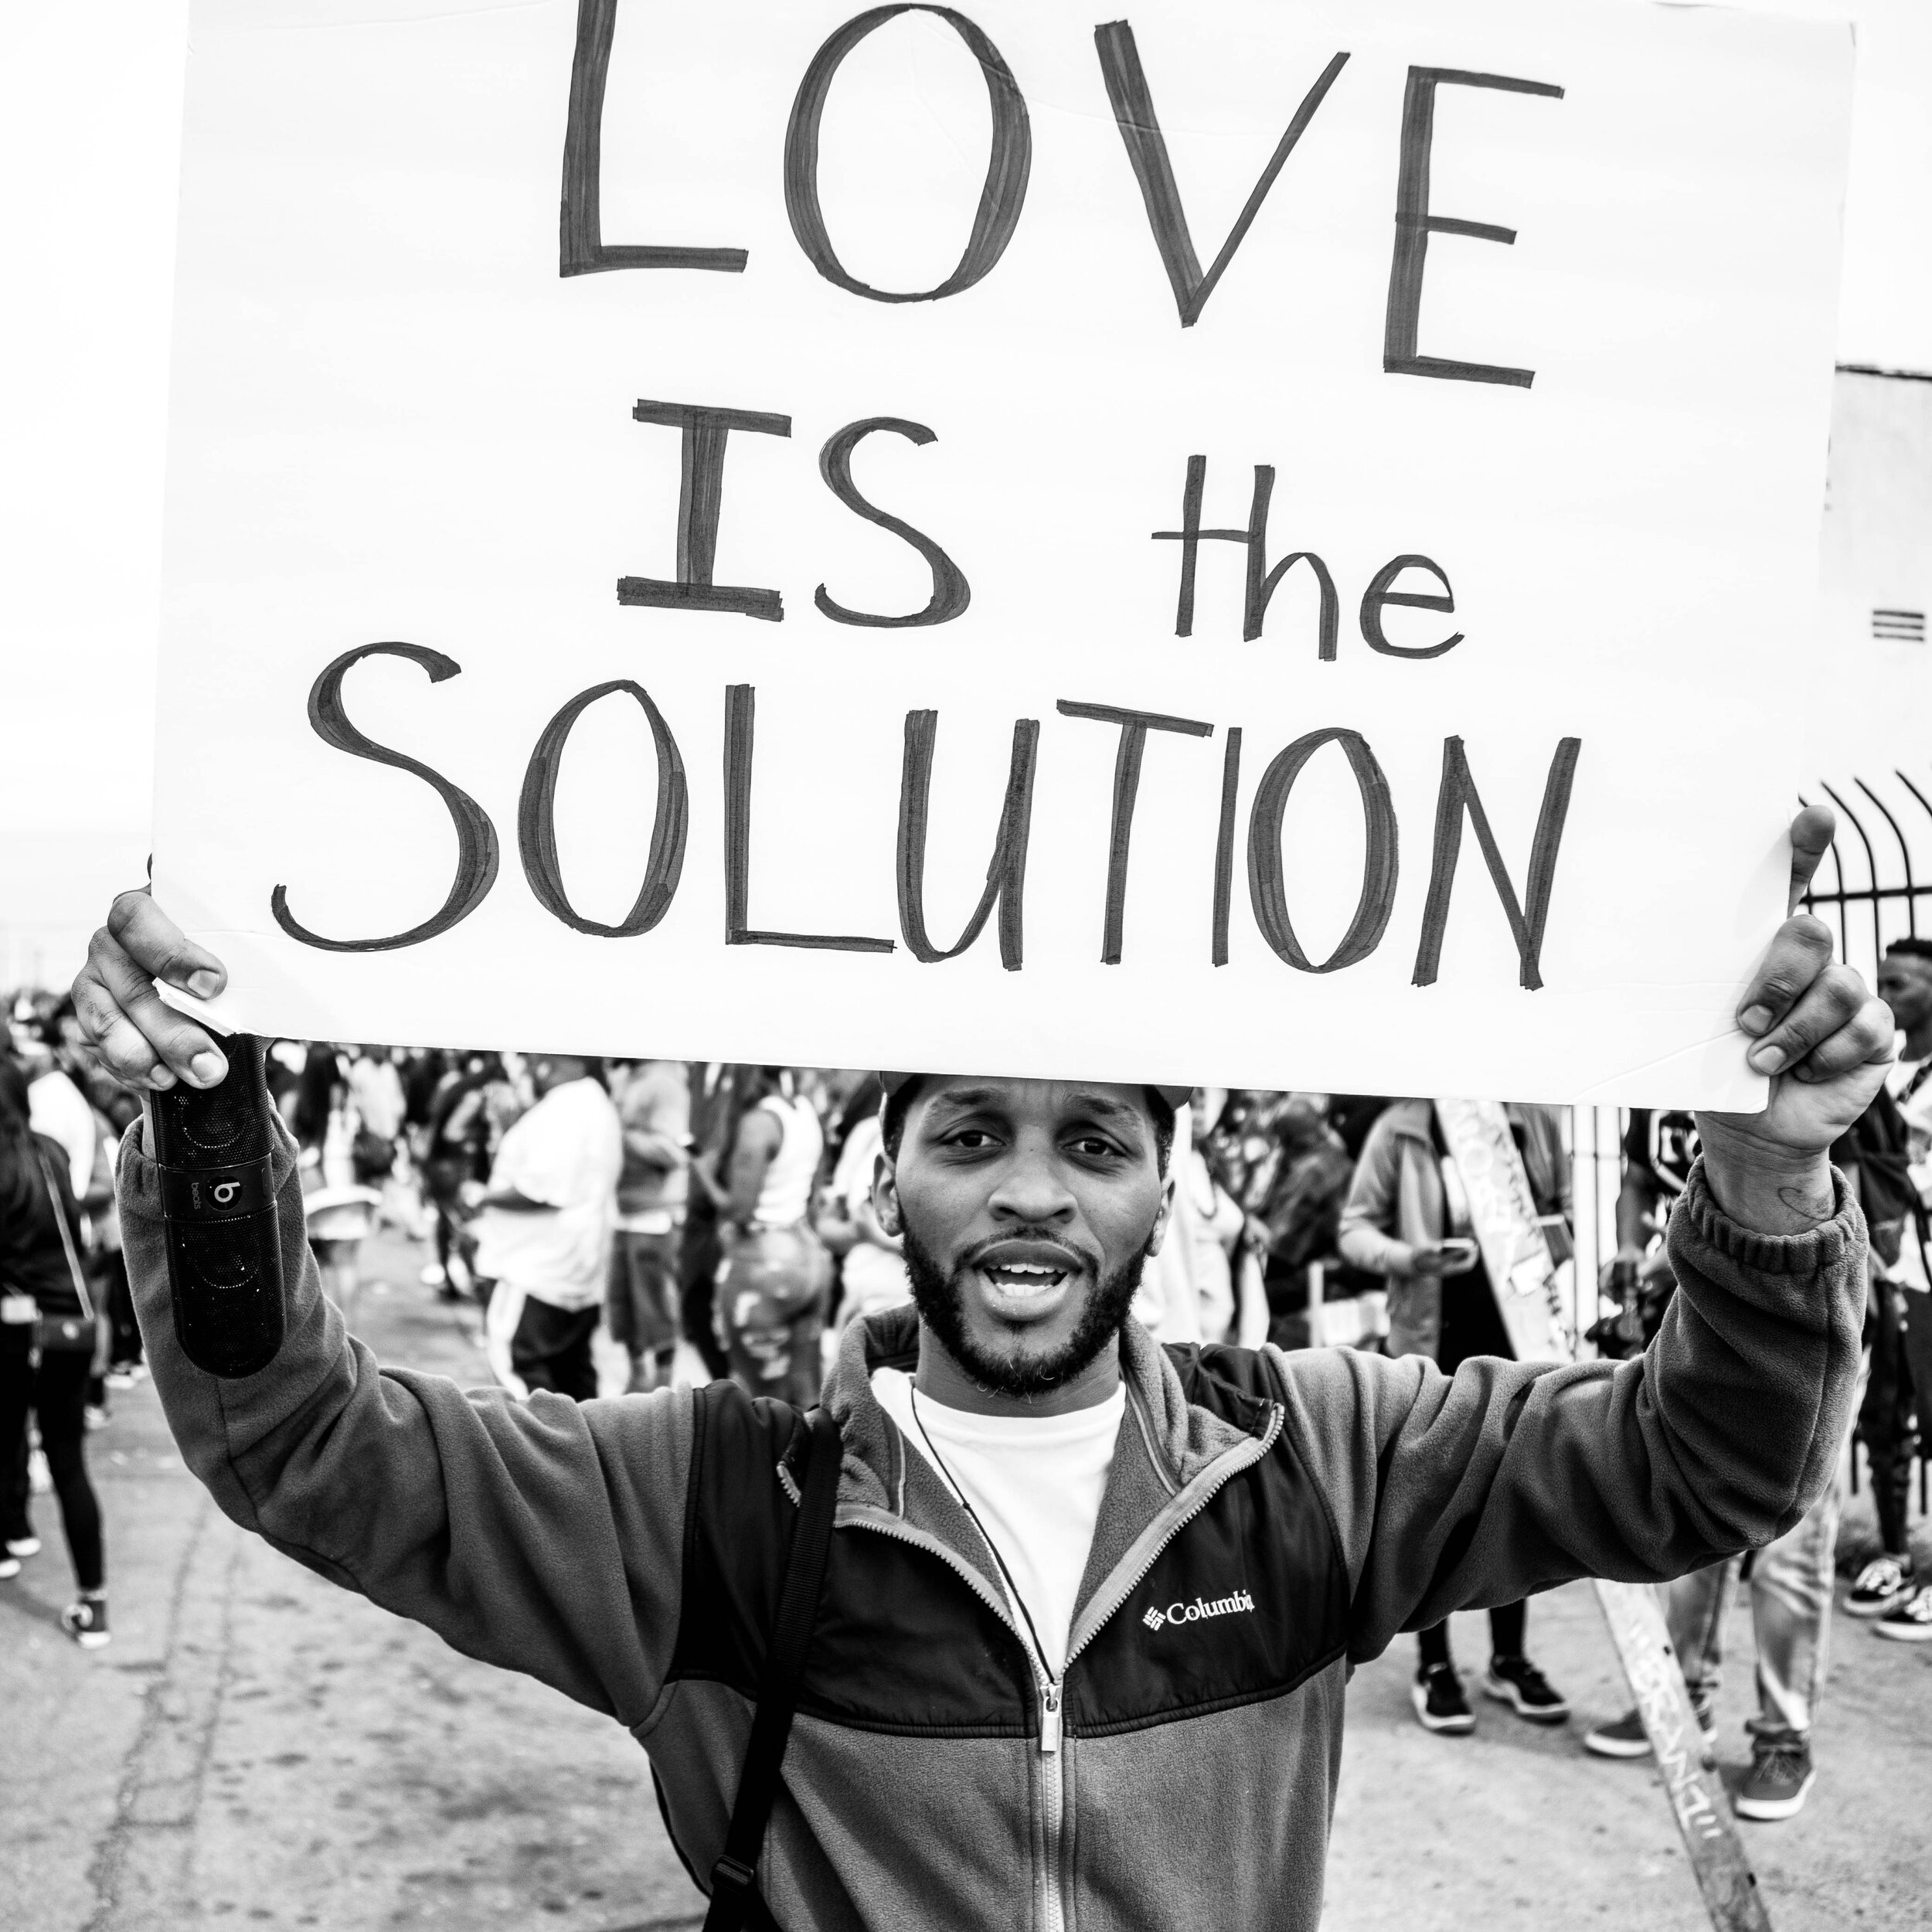  Matthew Sutton carries a sign reading “Love is The Solution.” As Sutton walked along the sidewalk, I saw him say, “I love you” to nearly every person he passed. When I snapped this picture, he yelled, “I love you too, cameraman!”  